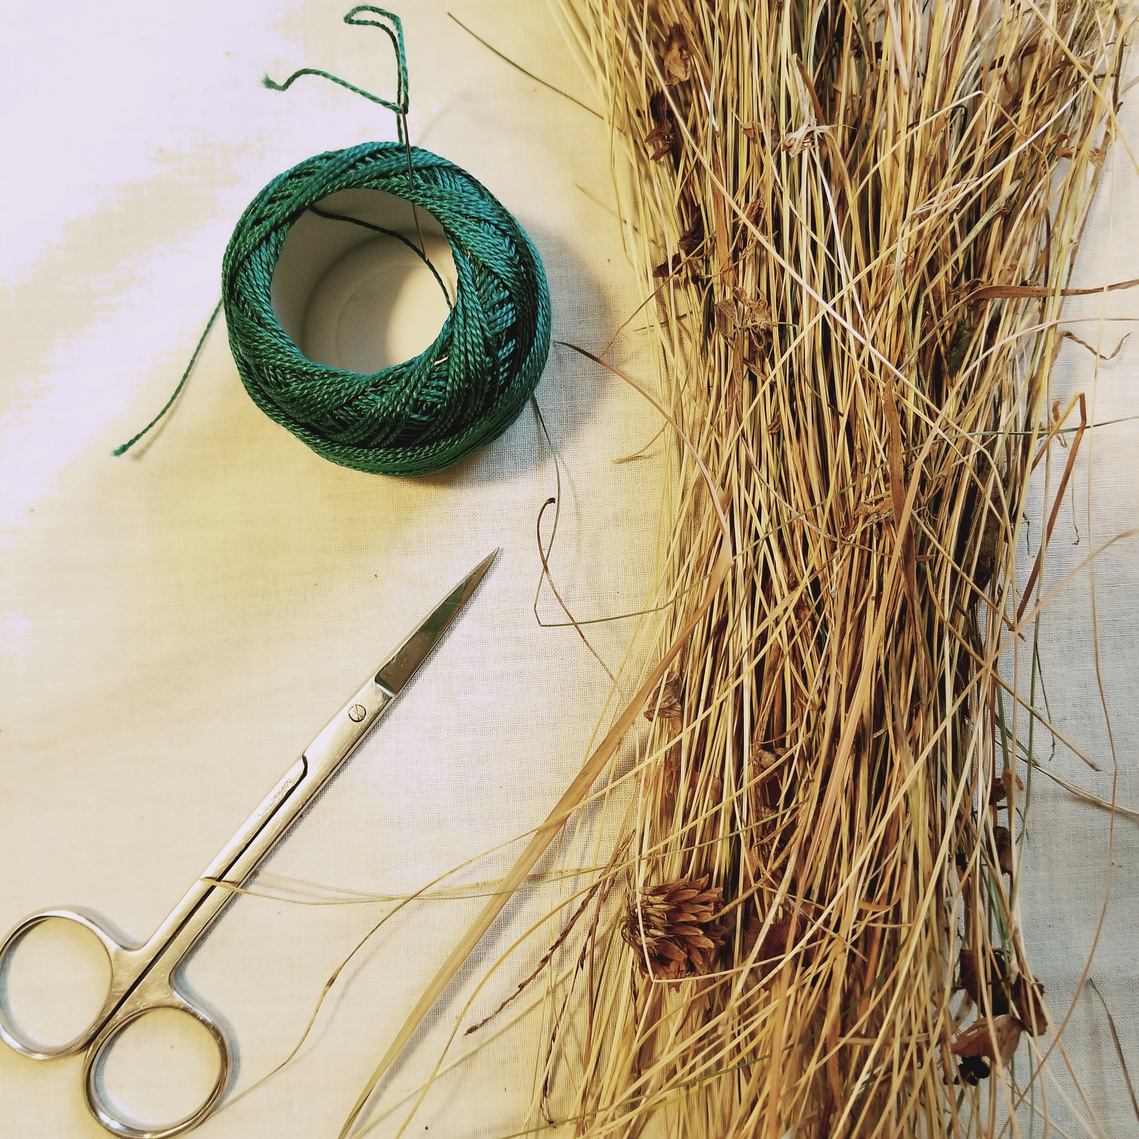 Dried grass, spool of thick green thread and a pair scissors on a cream background